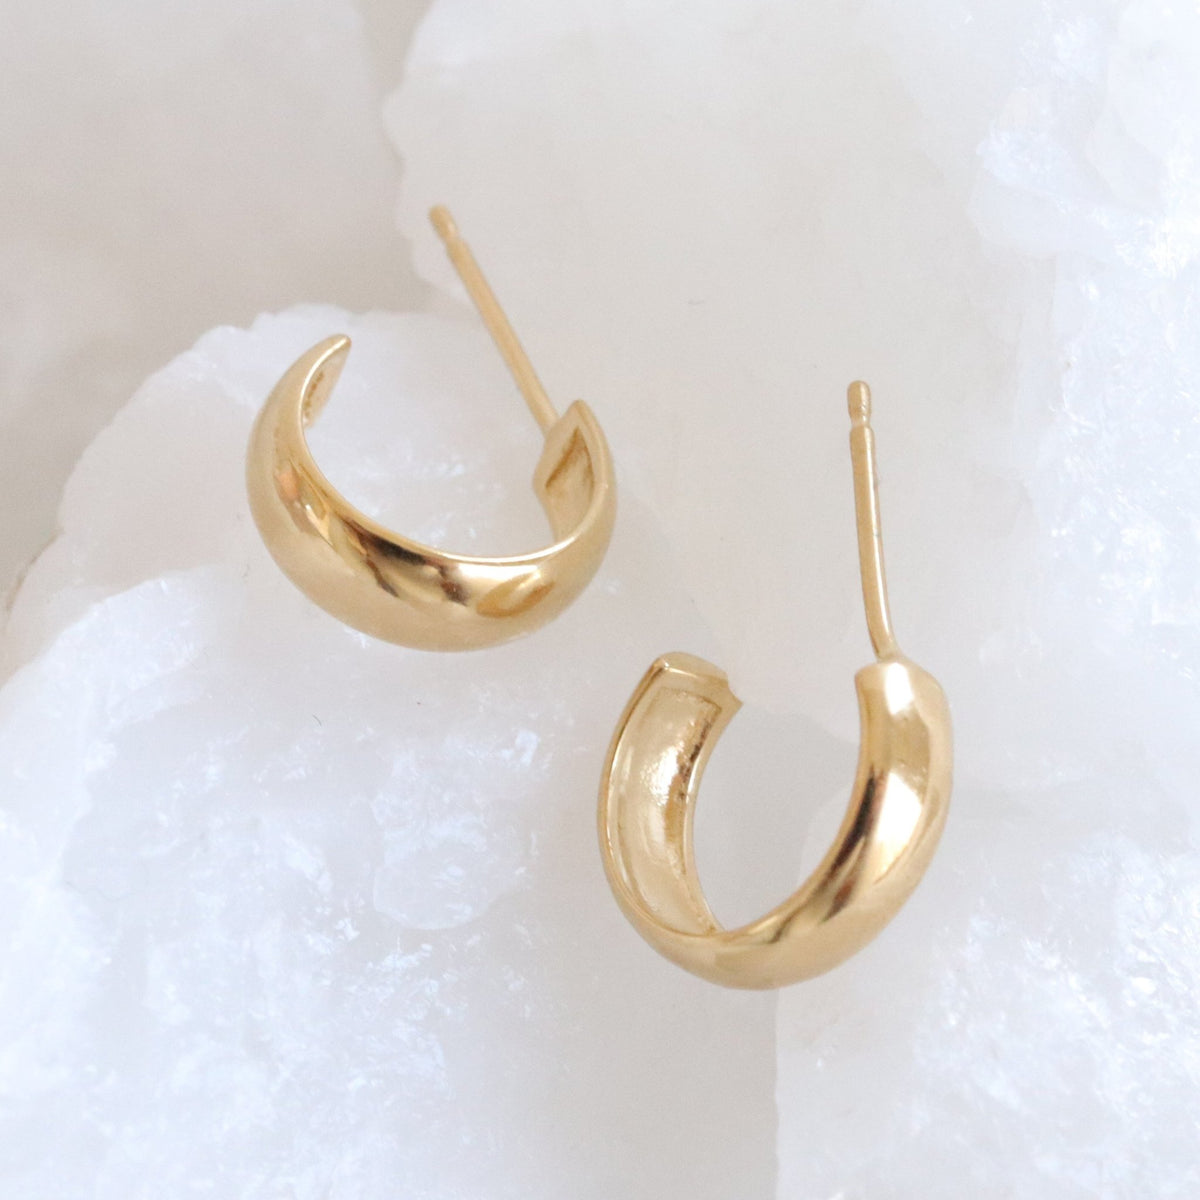 POISE HUGGIE HOOPS - 14K SOLID GOLD - SO PRETTY CARA COTTER